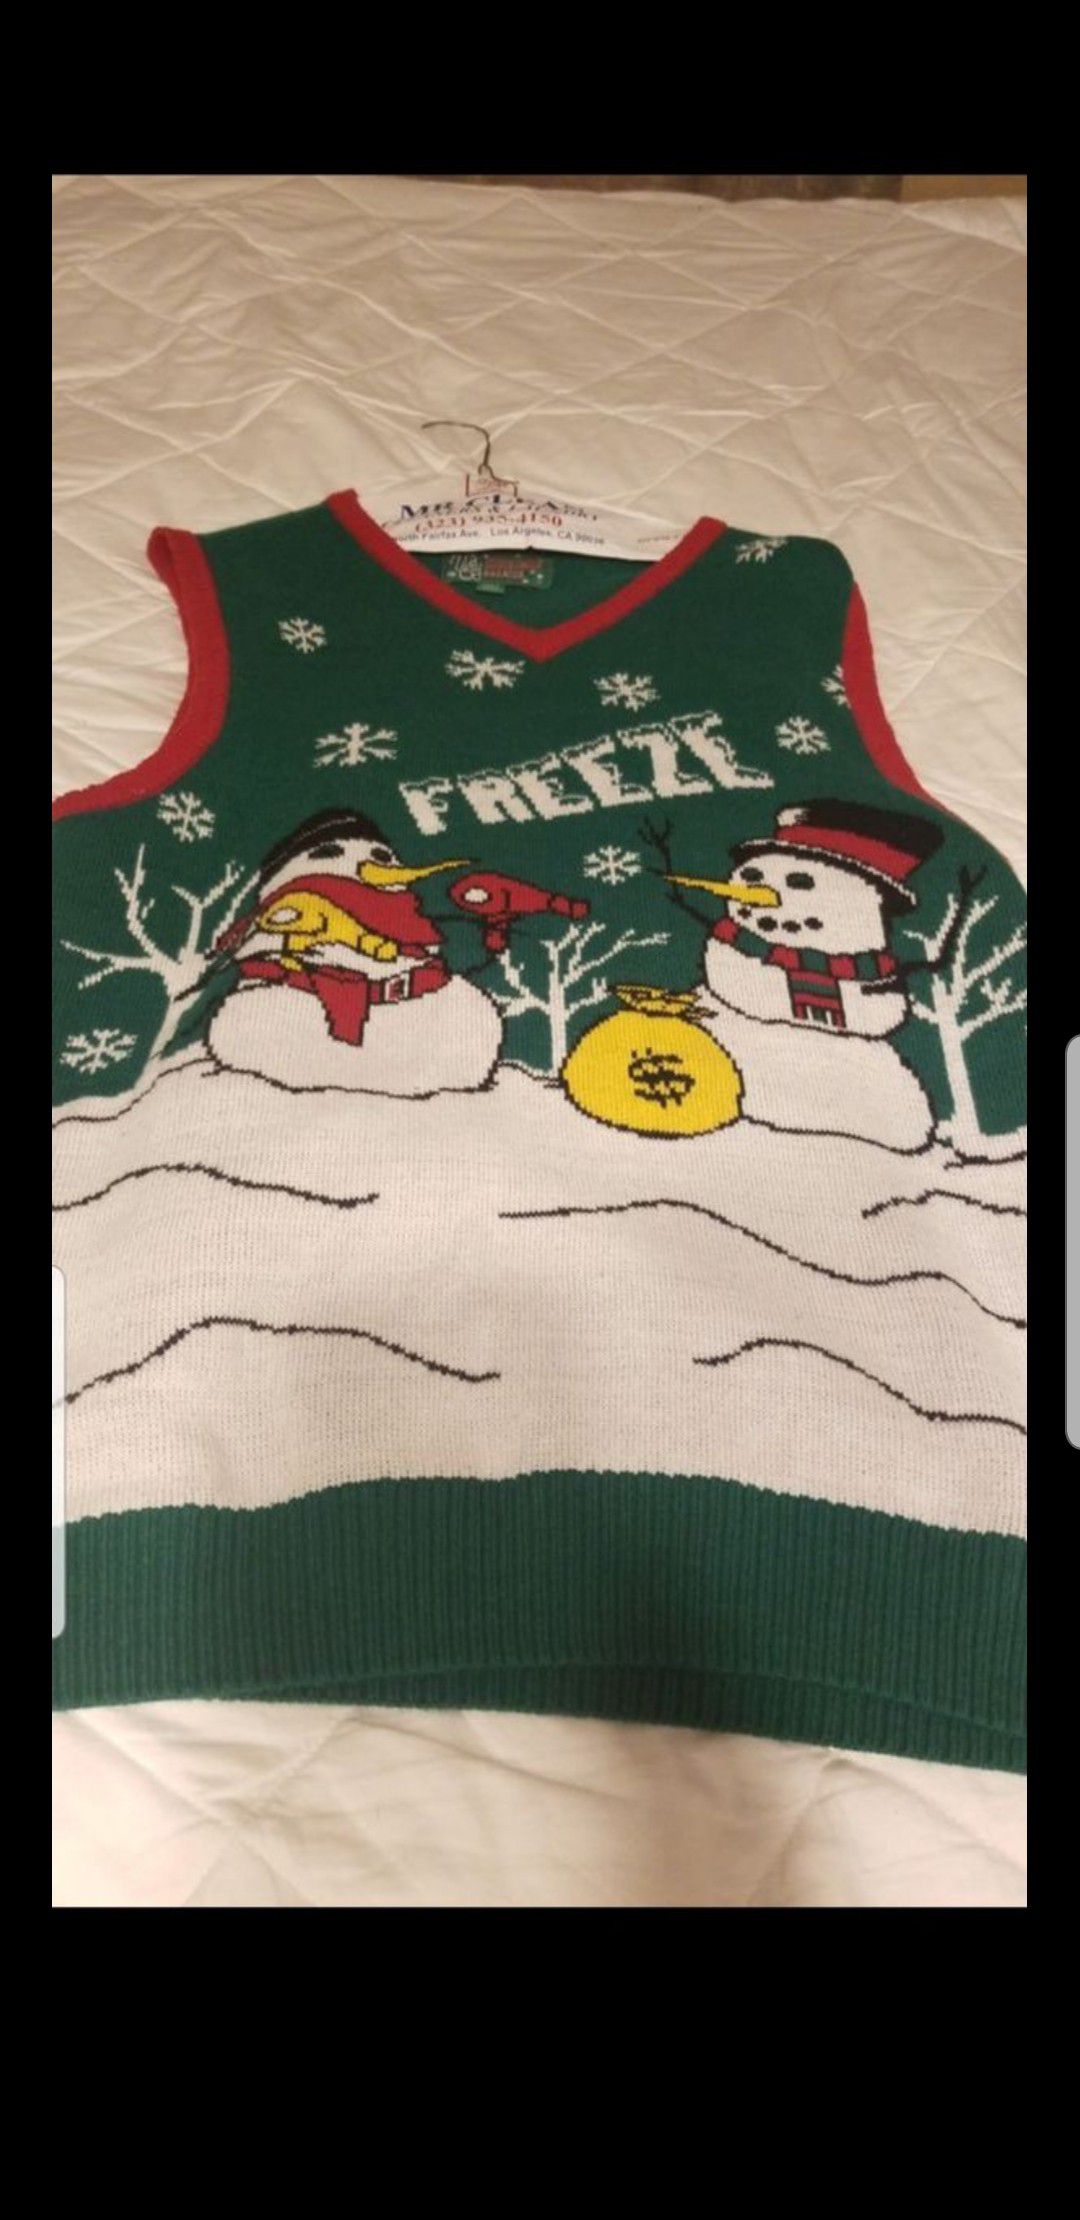 Super ugly Christmas sweater $15